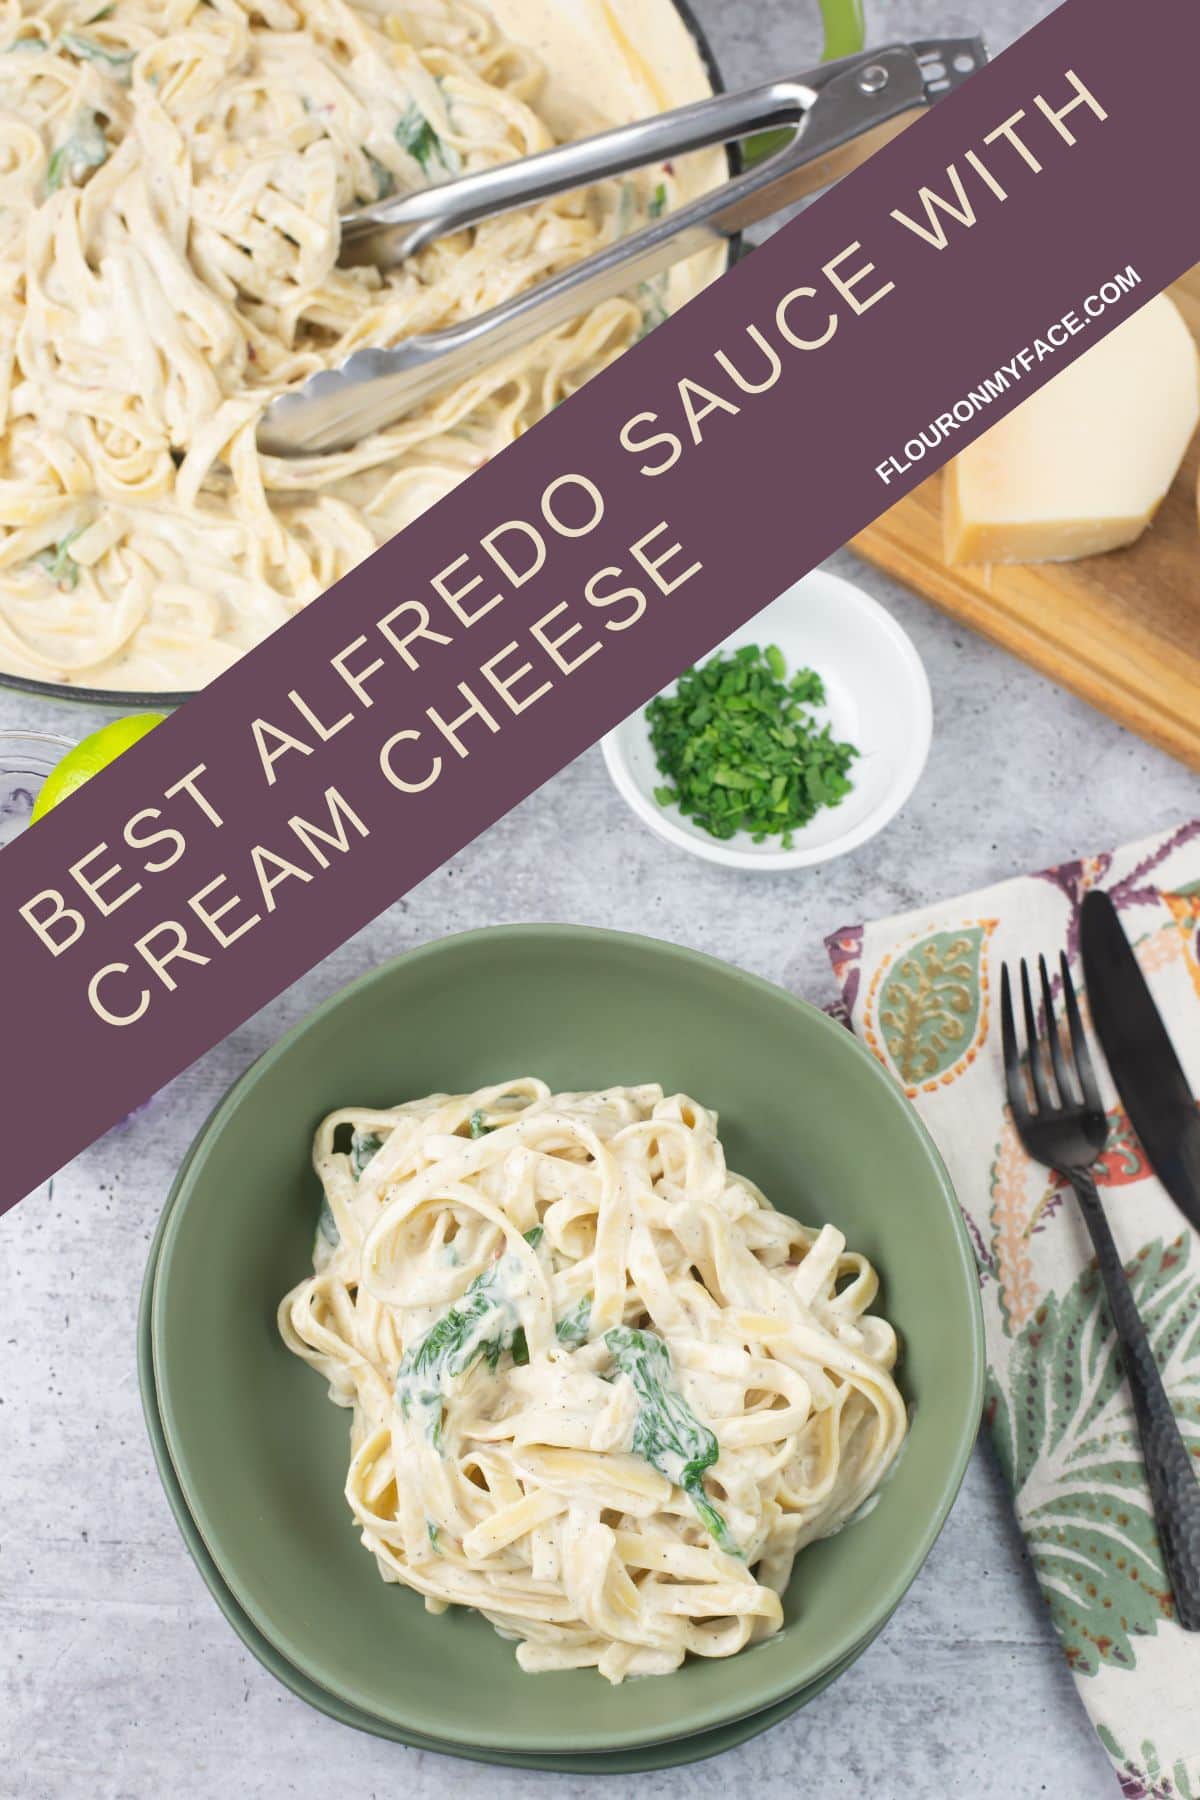 Rich Alfredo Sauce made with cream cheese in a bowl with a skillet in the background.